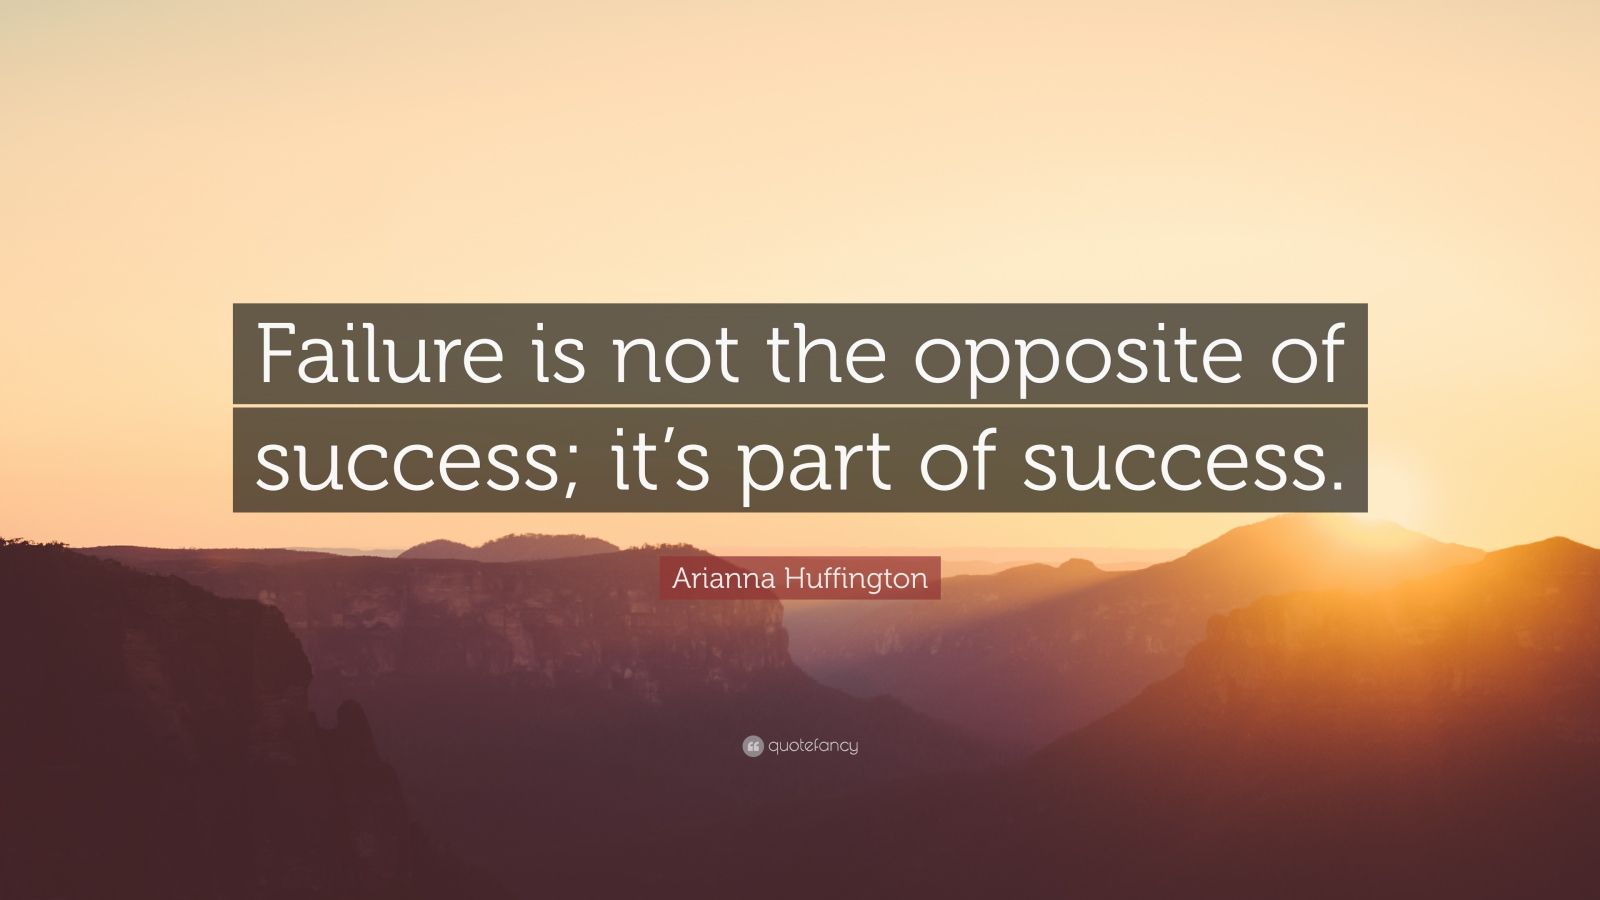 Arianna Huffington Quote: “Failure is not the opposite of success; it’s